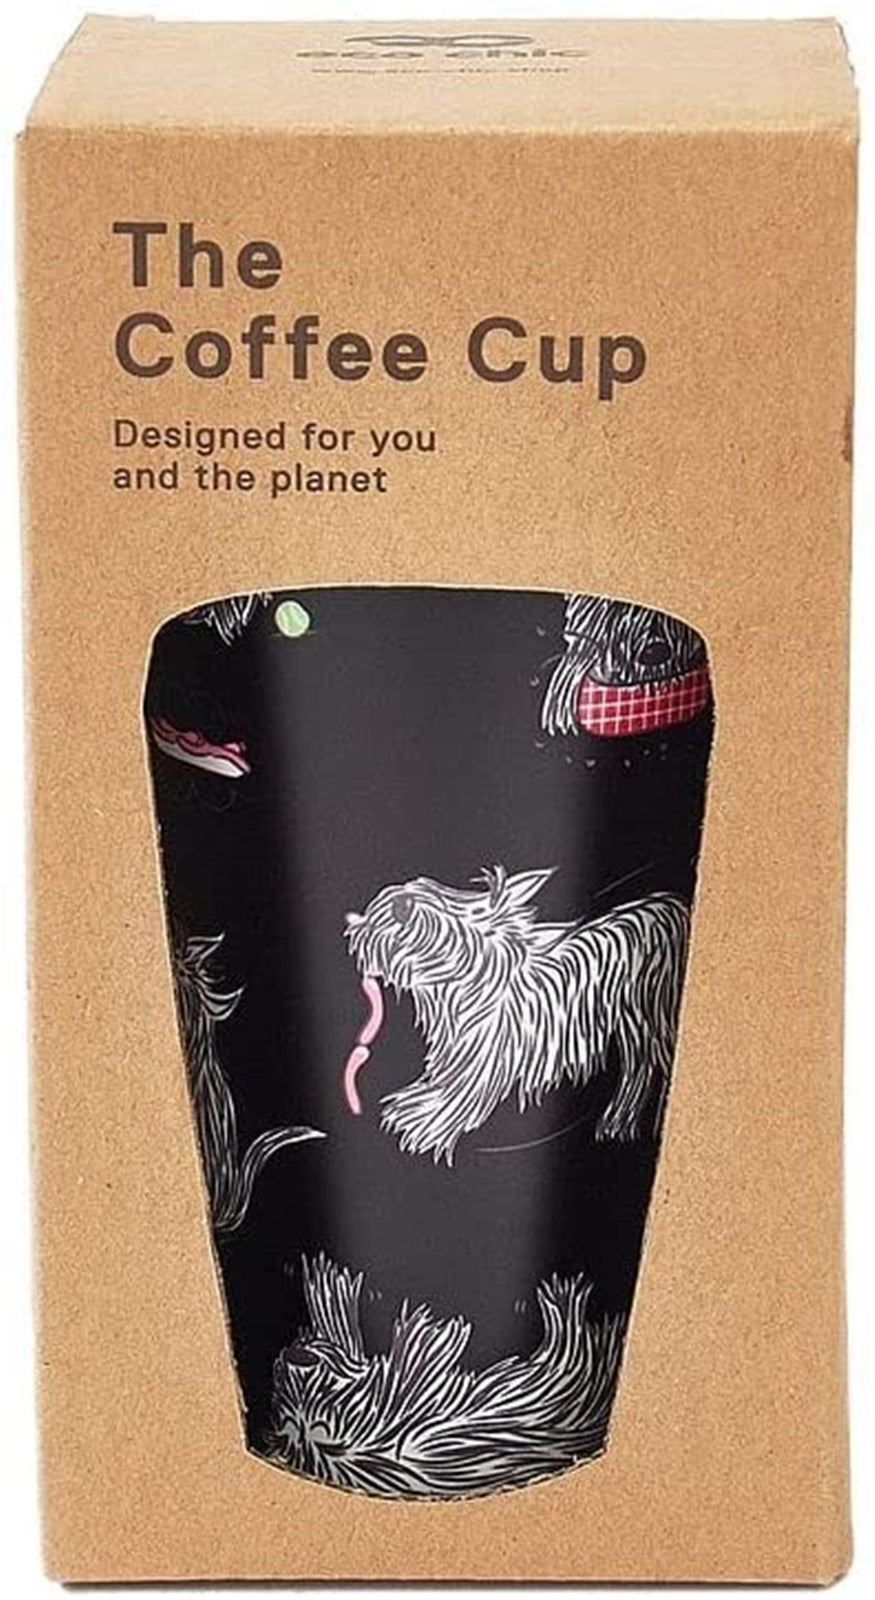 Eco Chic Reusable Thermal Coffee Cup | Stainless Steel Insulated Travel Mug with Leakproof Lid | Eco-Friendly and Reusable for Hot & Cold Drinks (Black Scotties, 380ml/13oz)